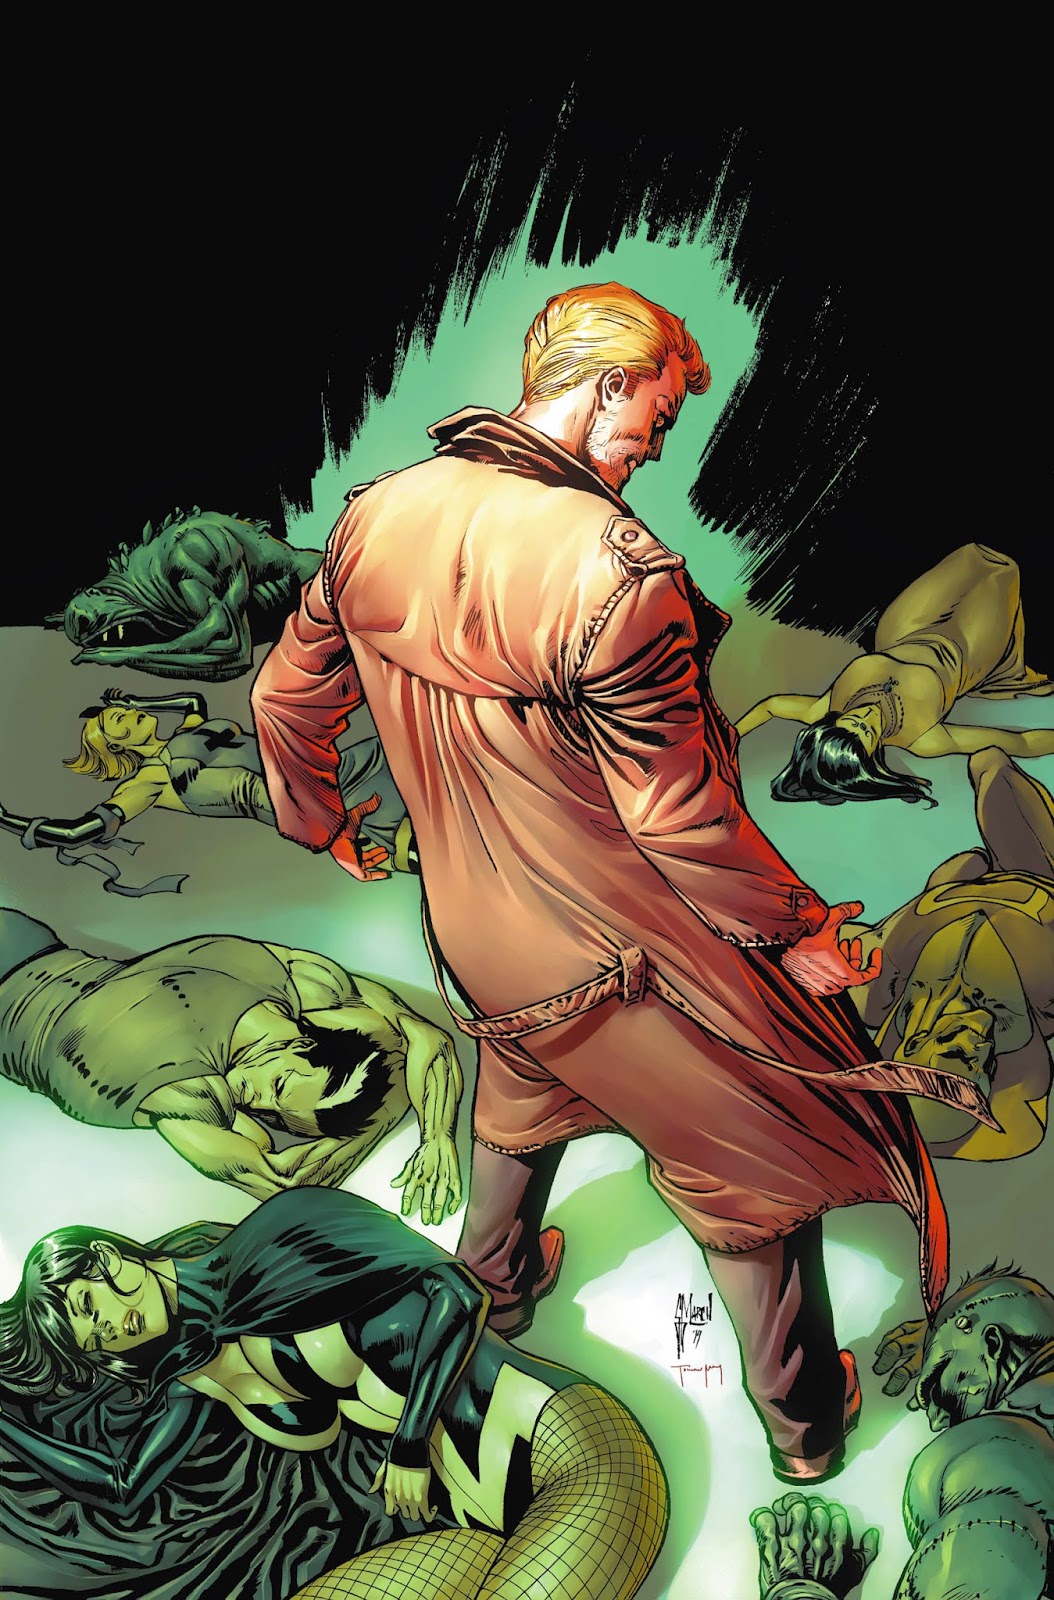 JUSTICE LEAGUE DARK 40 cover progress by Guillem March